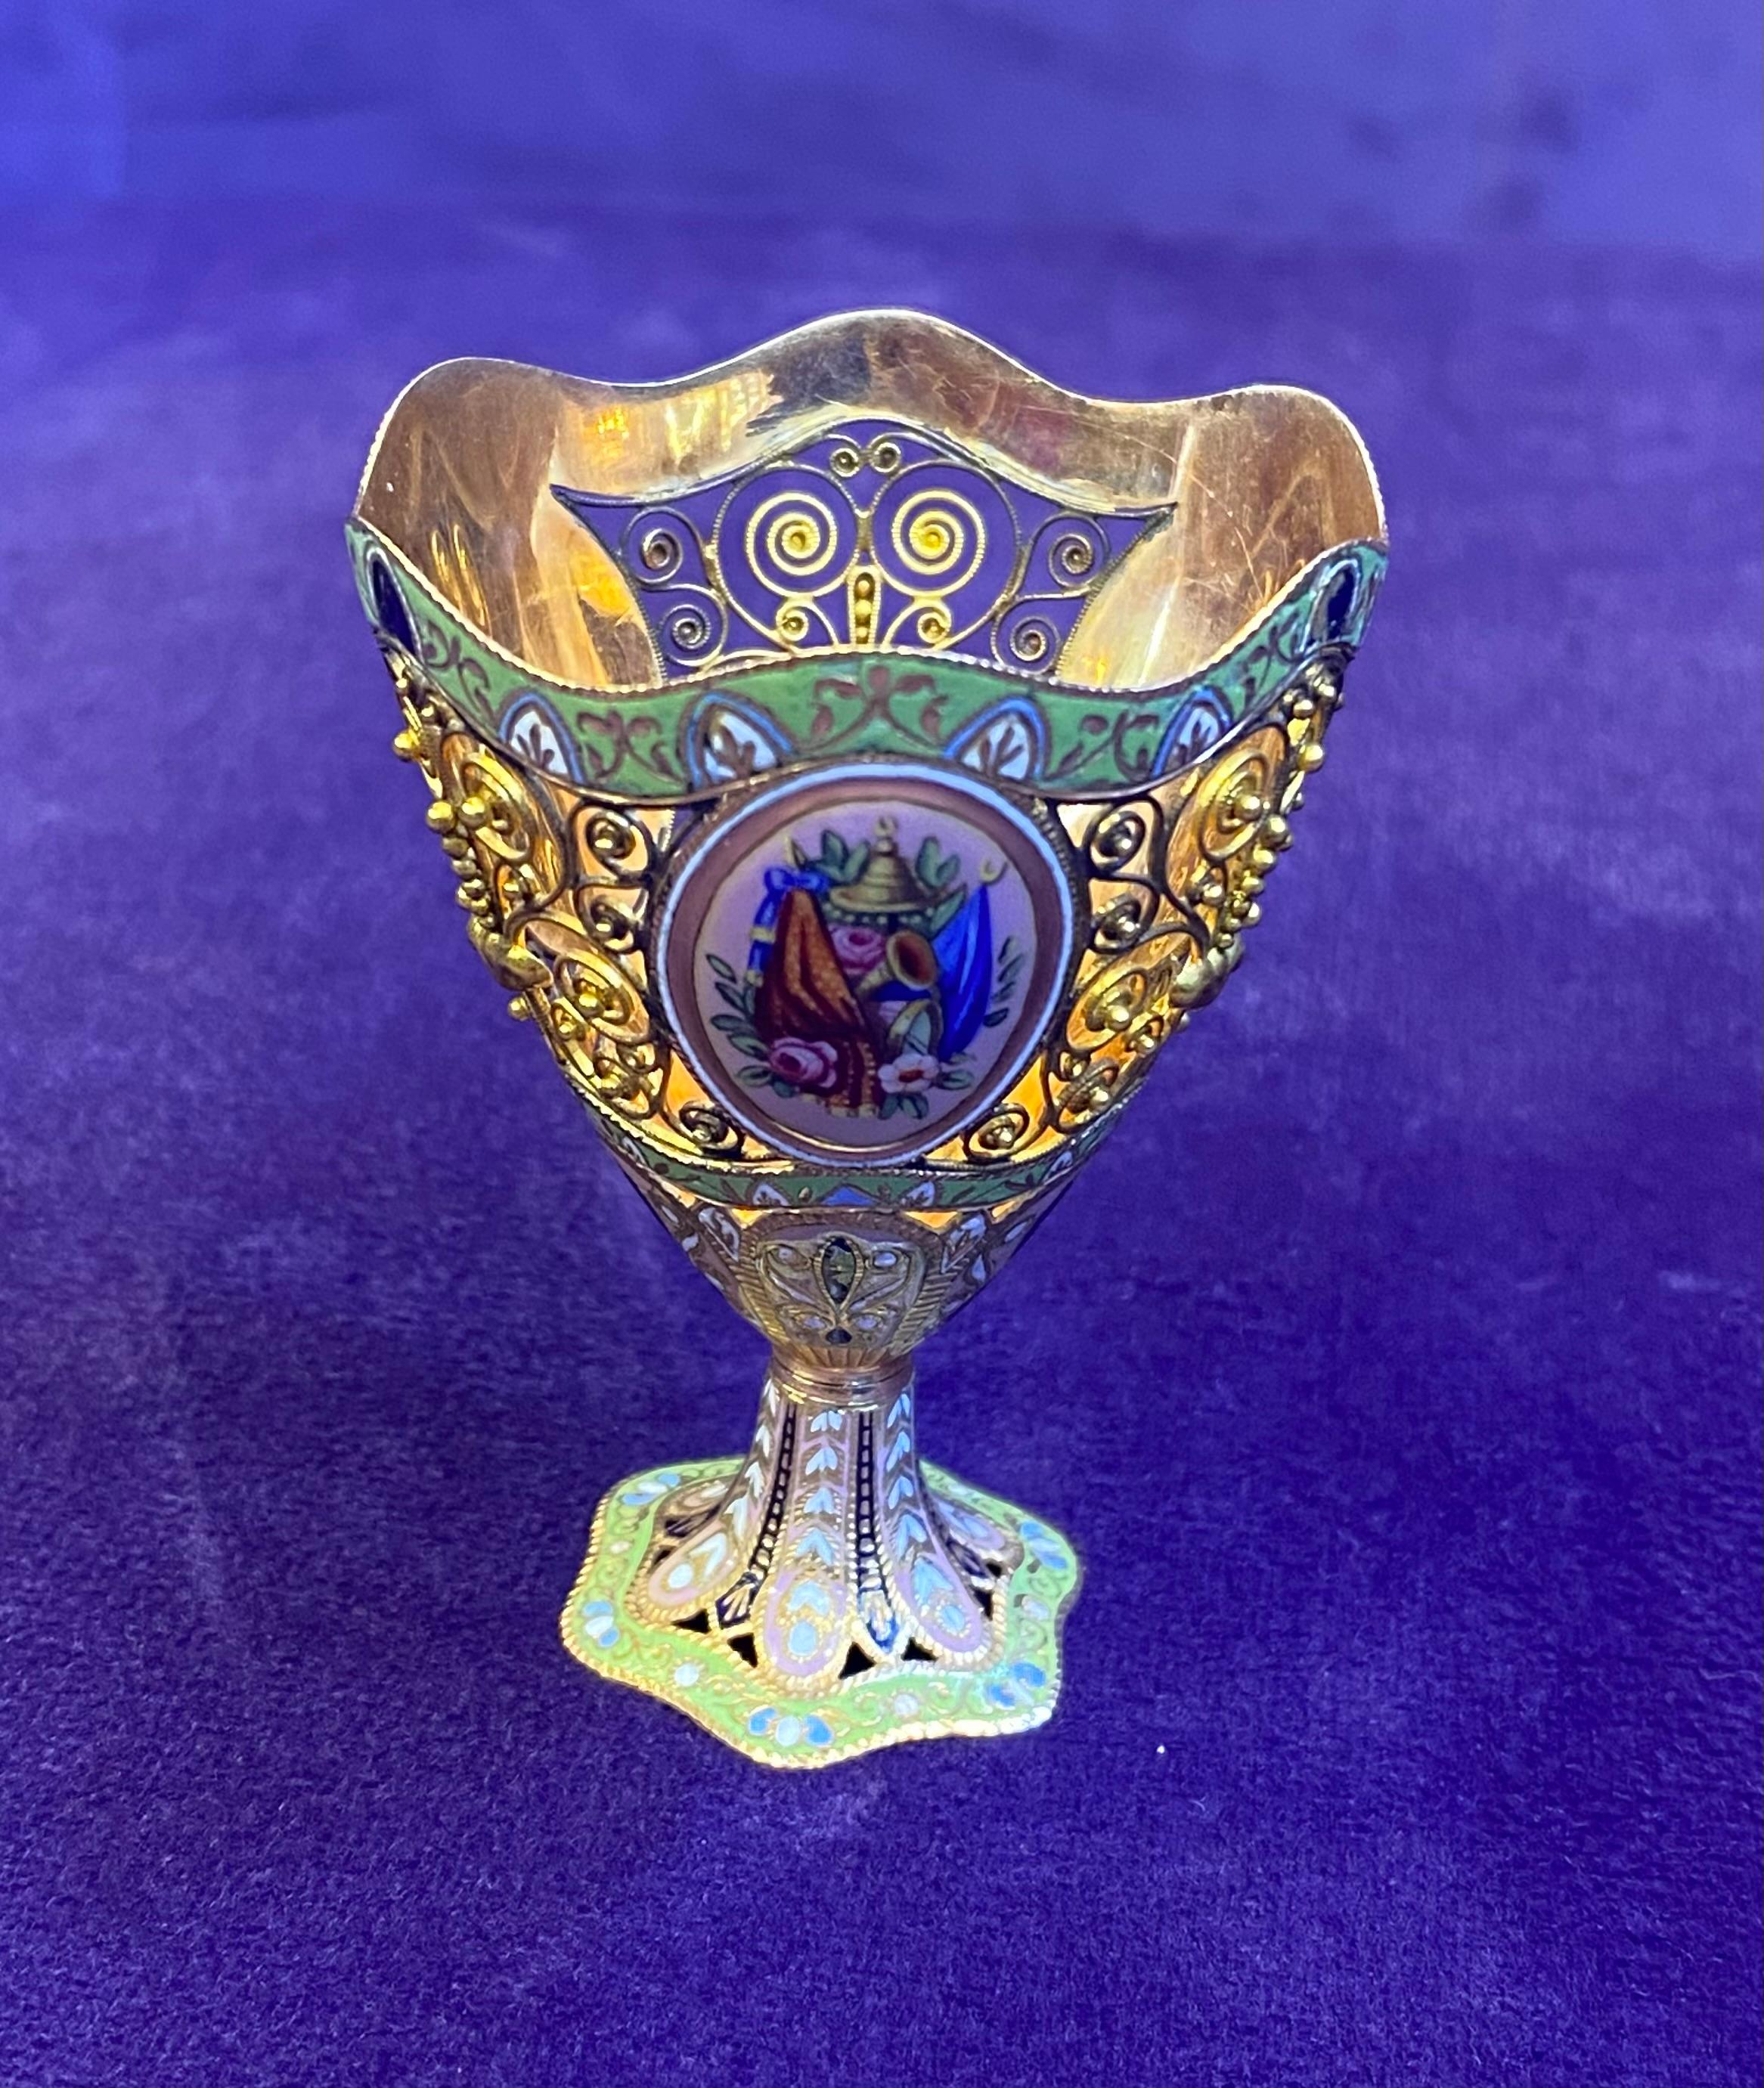 Multi Color Enamel & Gold Zarf -A zarf is a small cup used for coffee designed to hold a small container inside in which to put the coffee.  This zarf  is designed with multi color enamel floral motifs on each side of the cup along with a gold